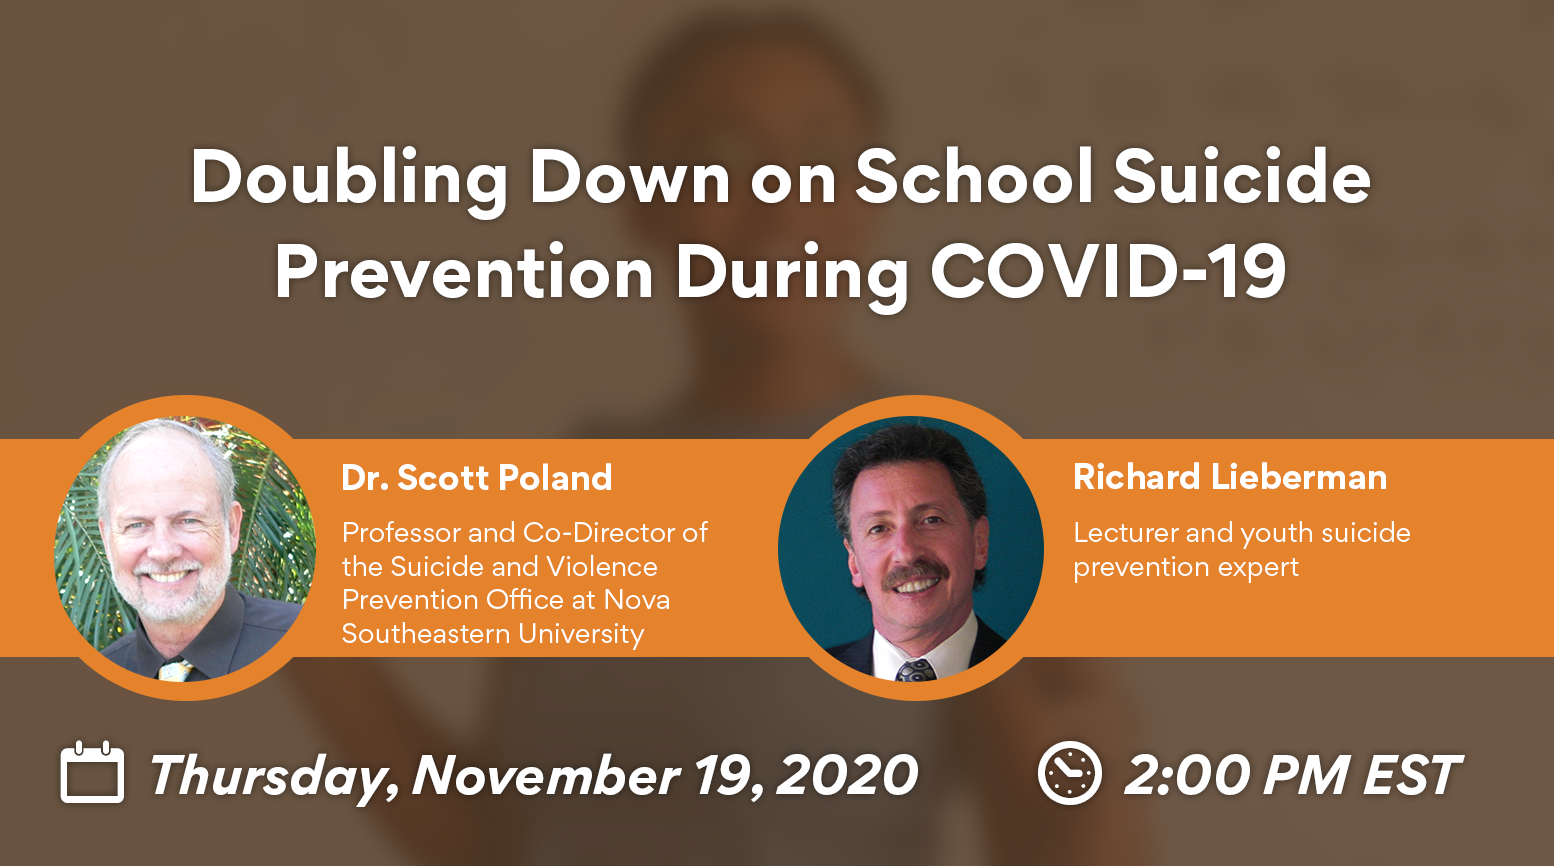 Doubling Down on School Suicide Prevention During COVID-19